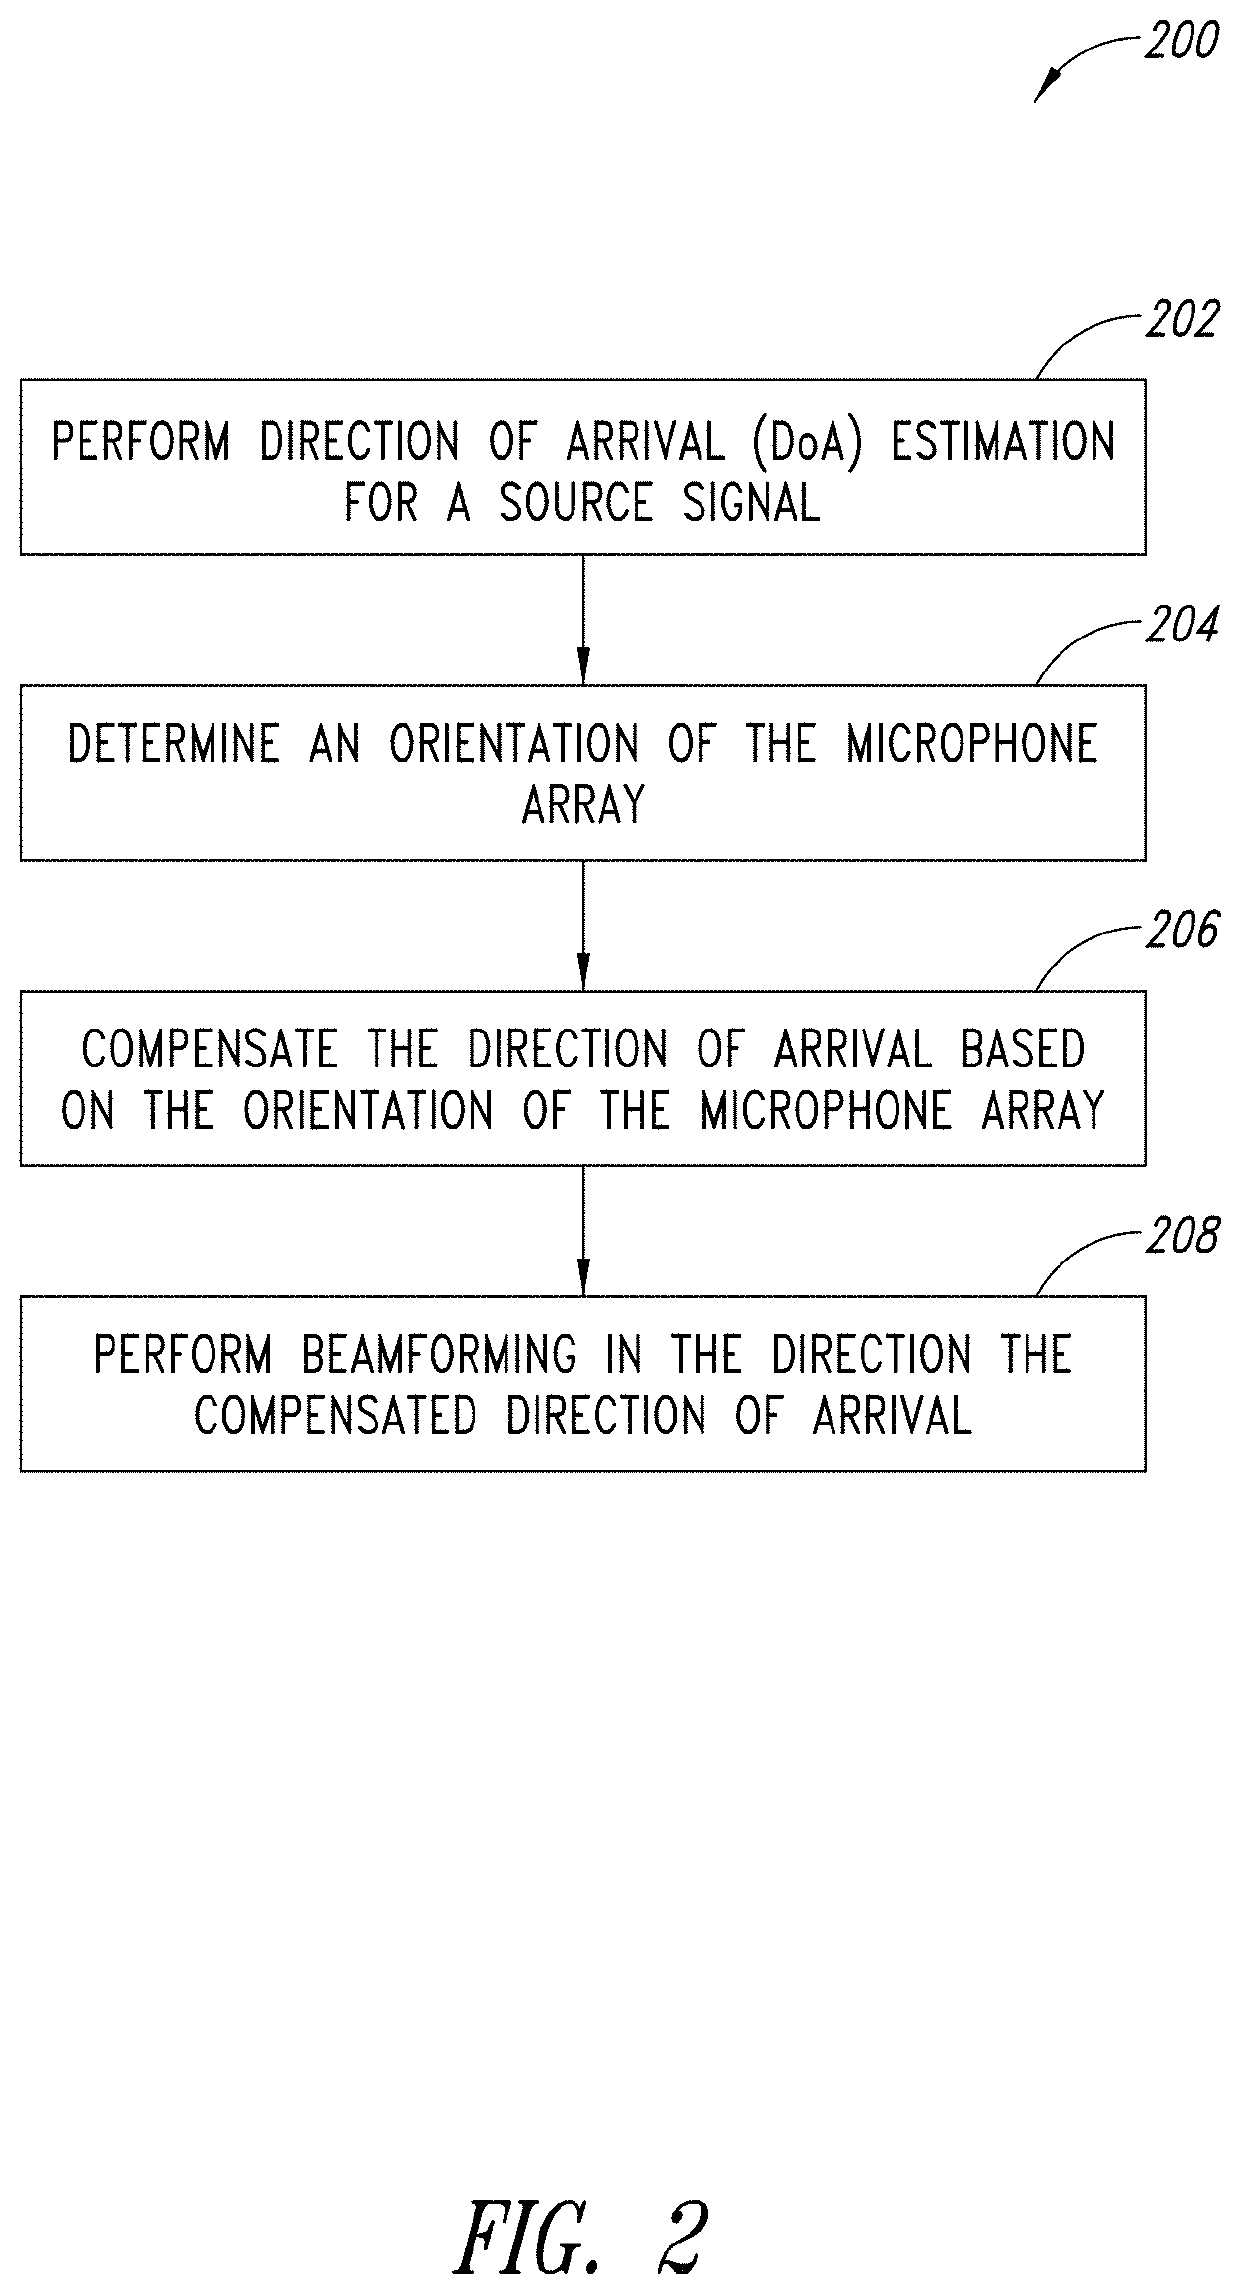 Microphone array auto-directive adaptive wideband beamforming using orientation information from MEMS sensors